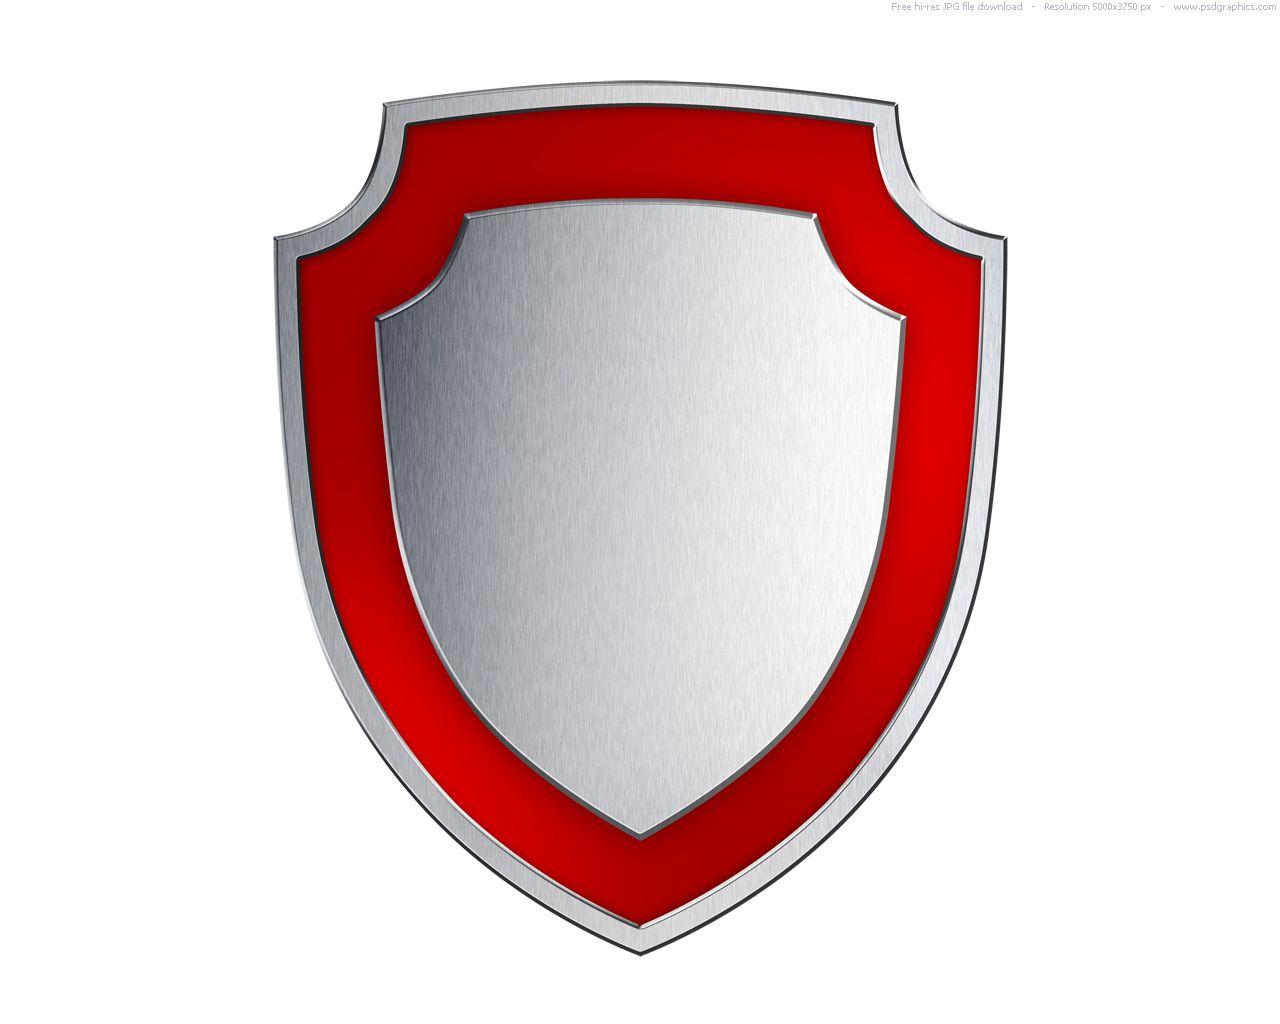 Round Shield Logo - Free Image Of Shield, Download Free Clip Art, Free Clip Art on ...